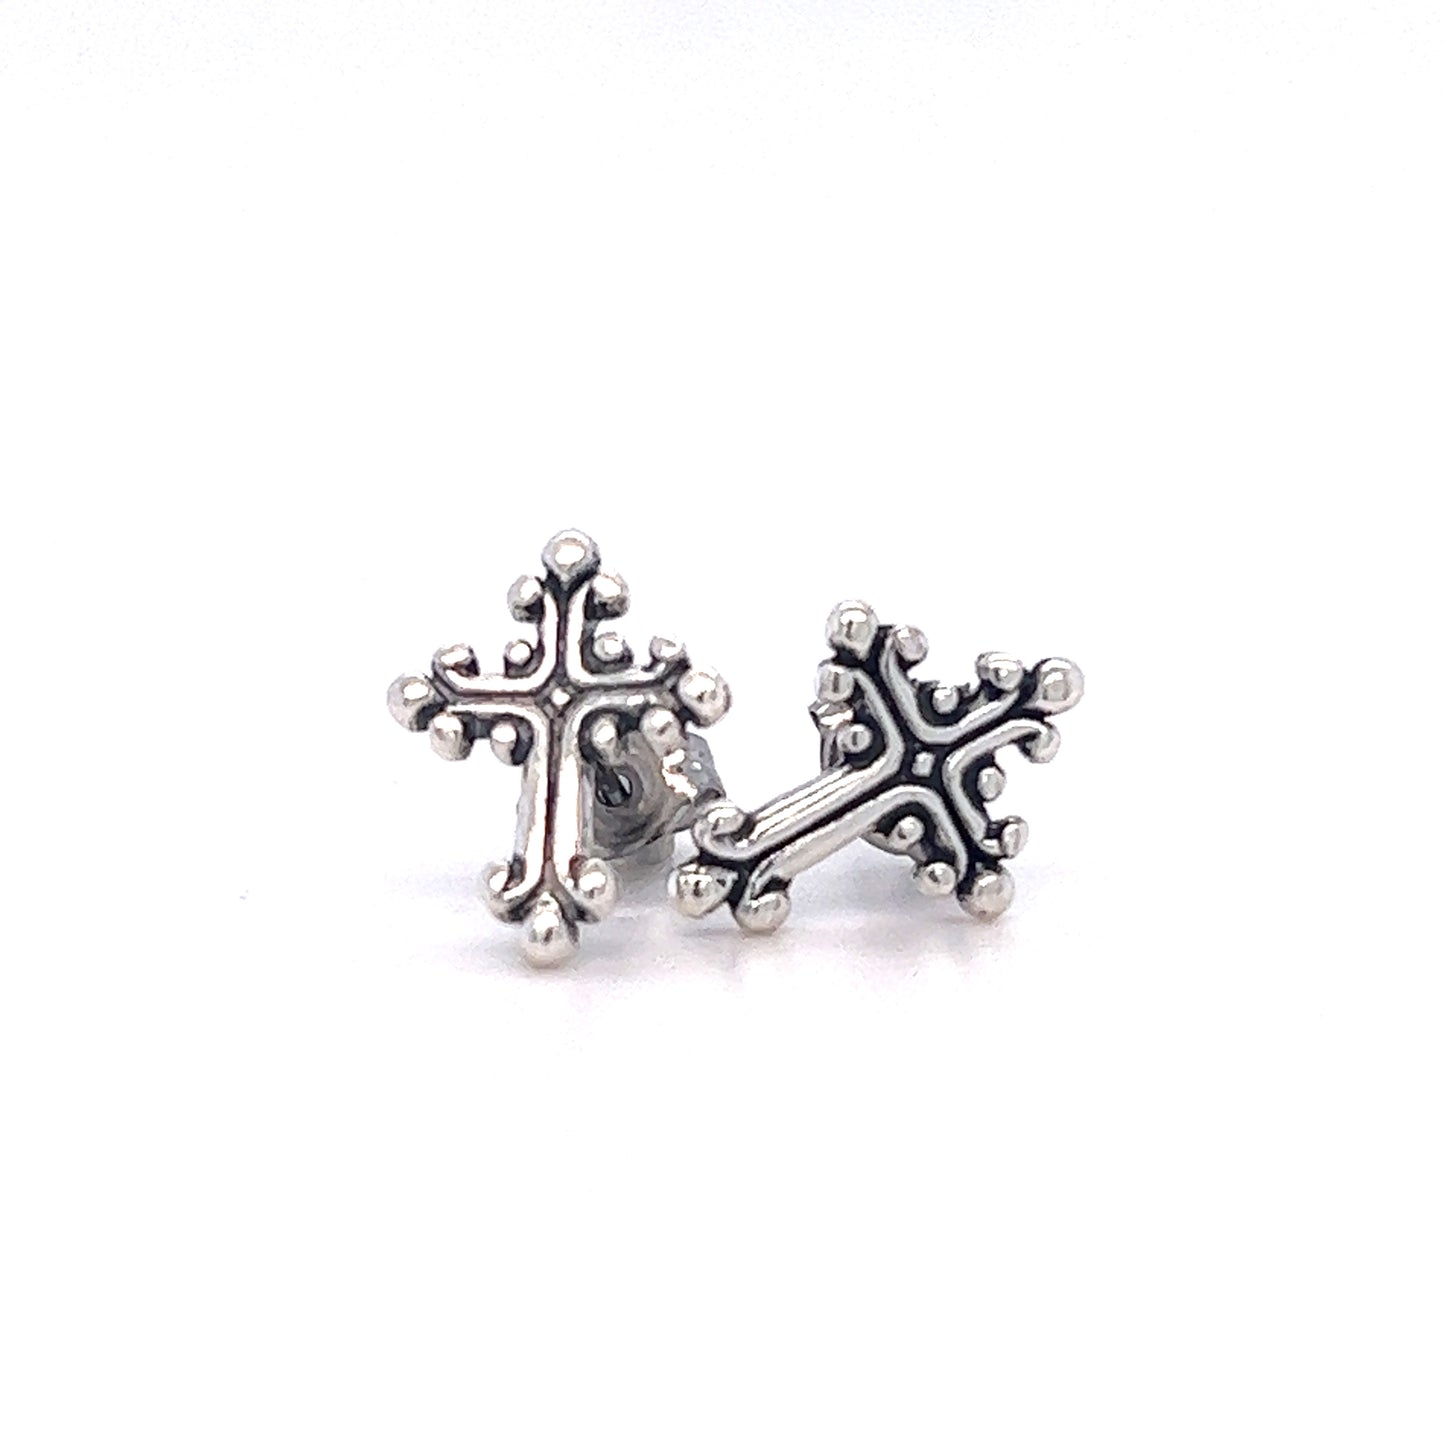 A pair of Super Silver Ornate Cross Studs with oxidized detailing.